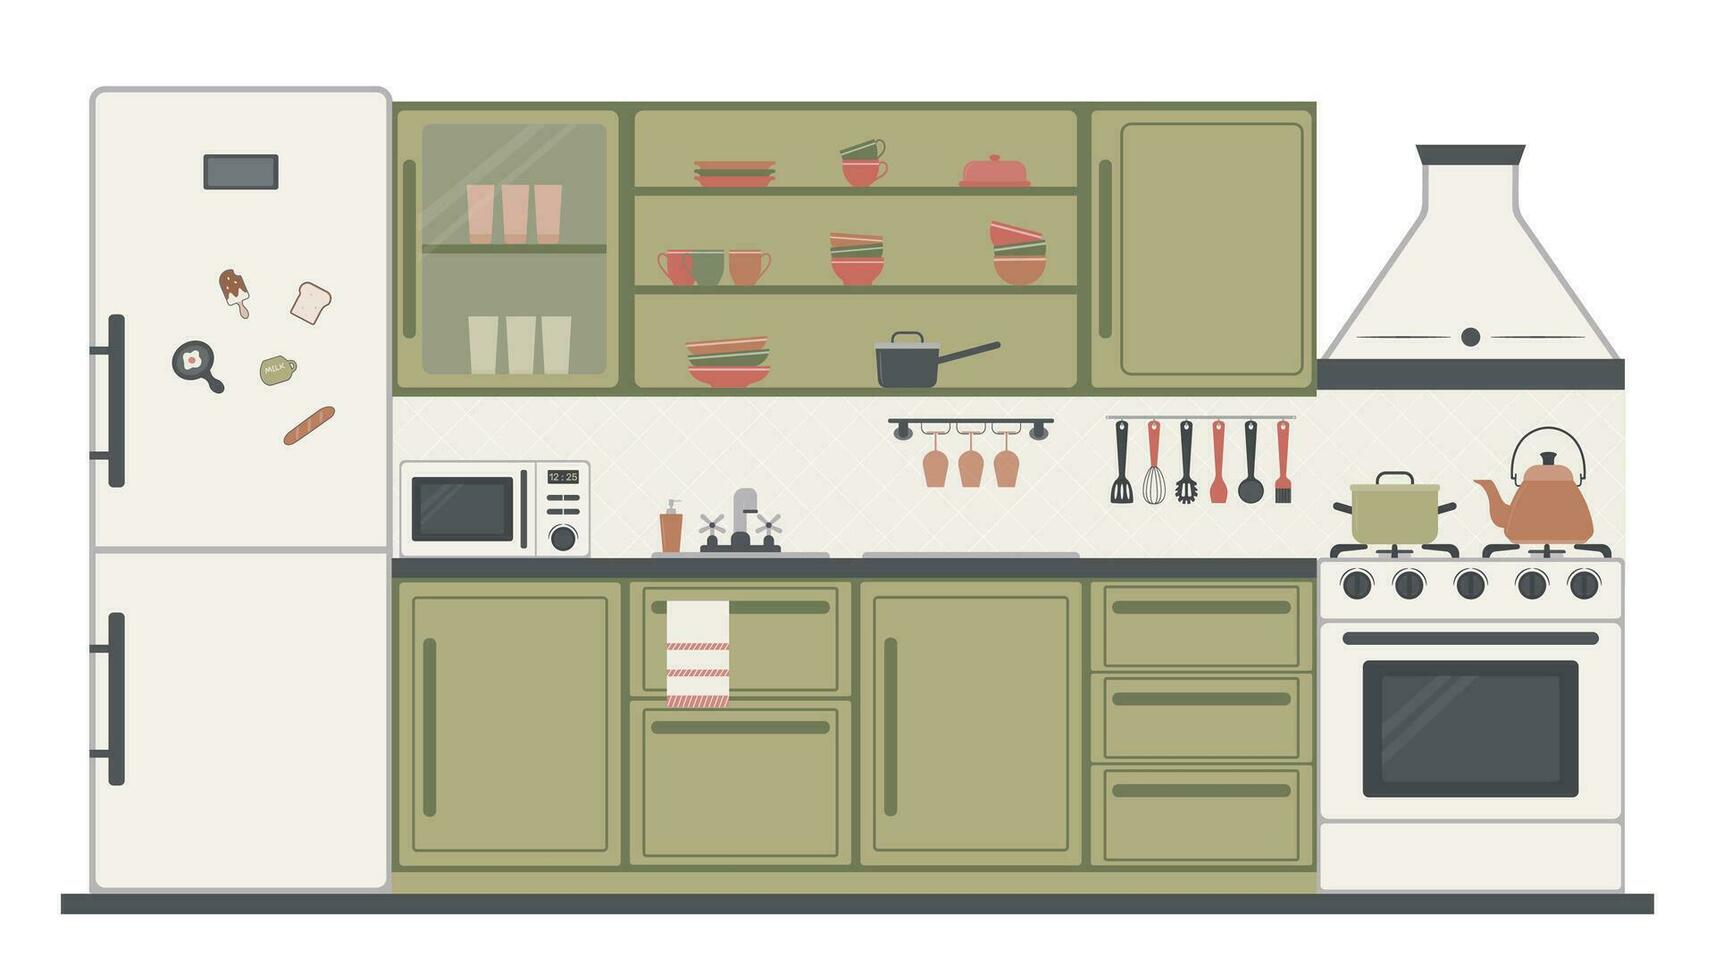 Kitchen interior design with furniture, appliances and dishes. Kitchen cabinets, gas stove, microwave, refrigerator with magnets, extractor hood. Vector illustration in the flat style.